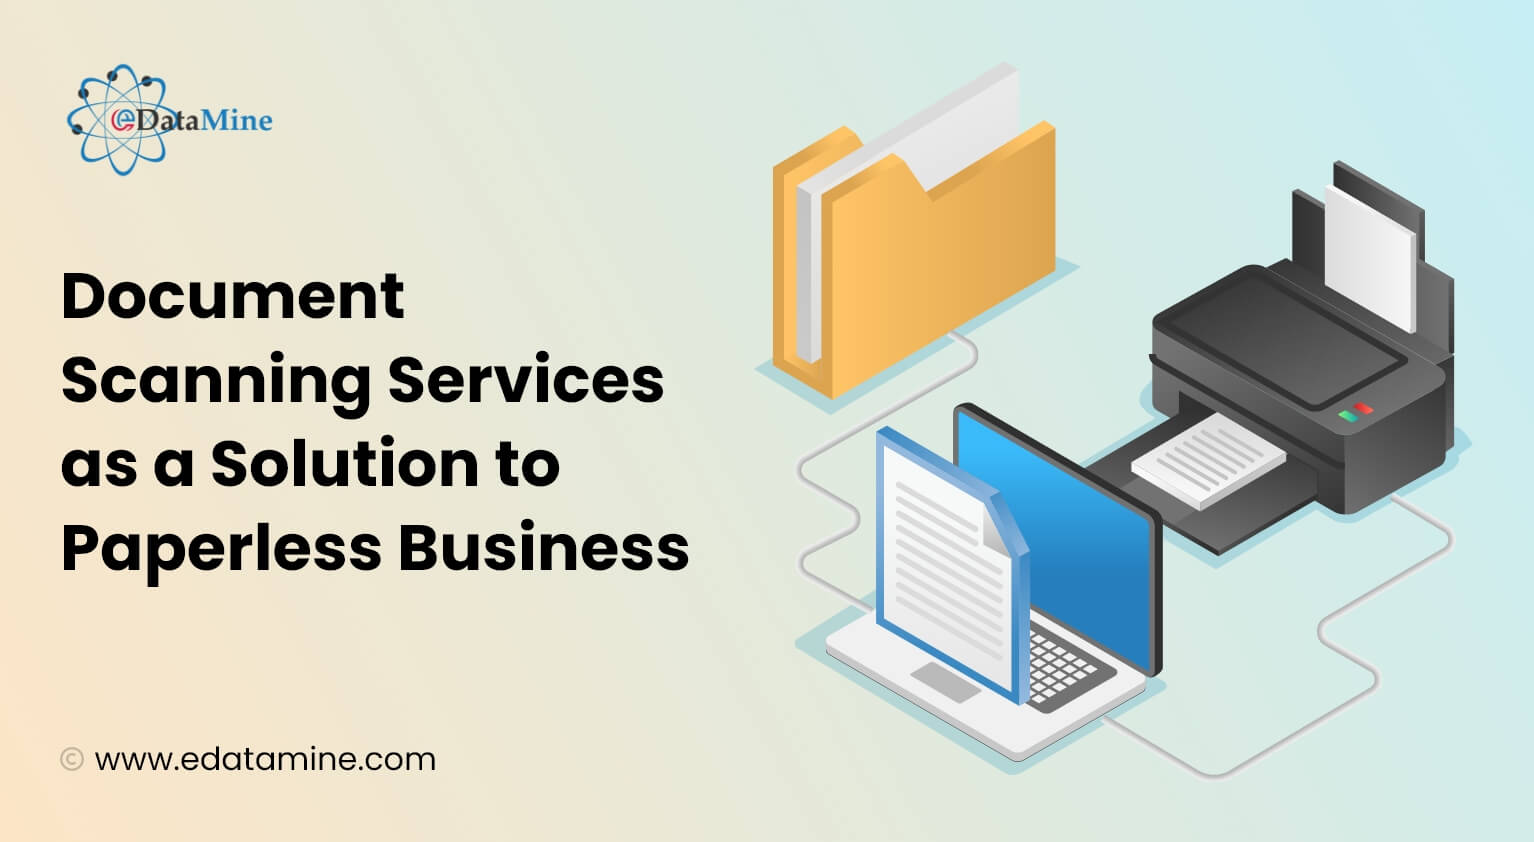 Document Scanning Services as a Solution to Paperless Business